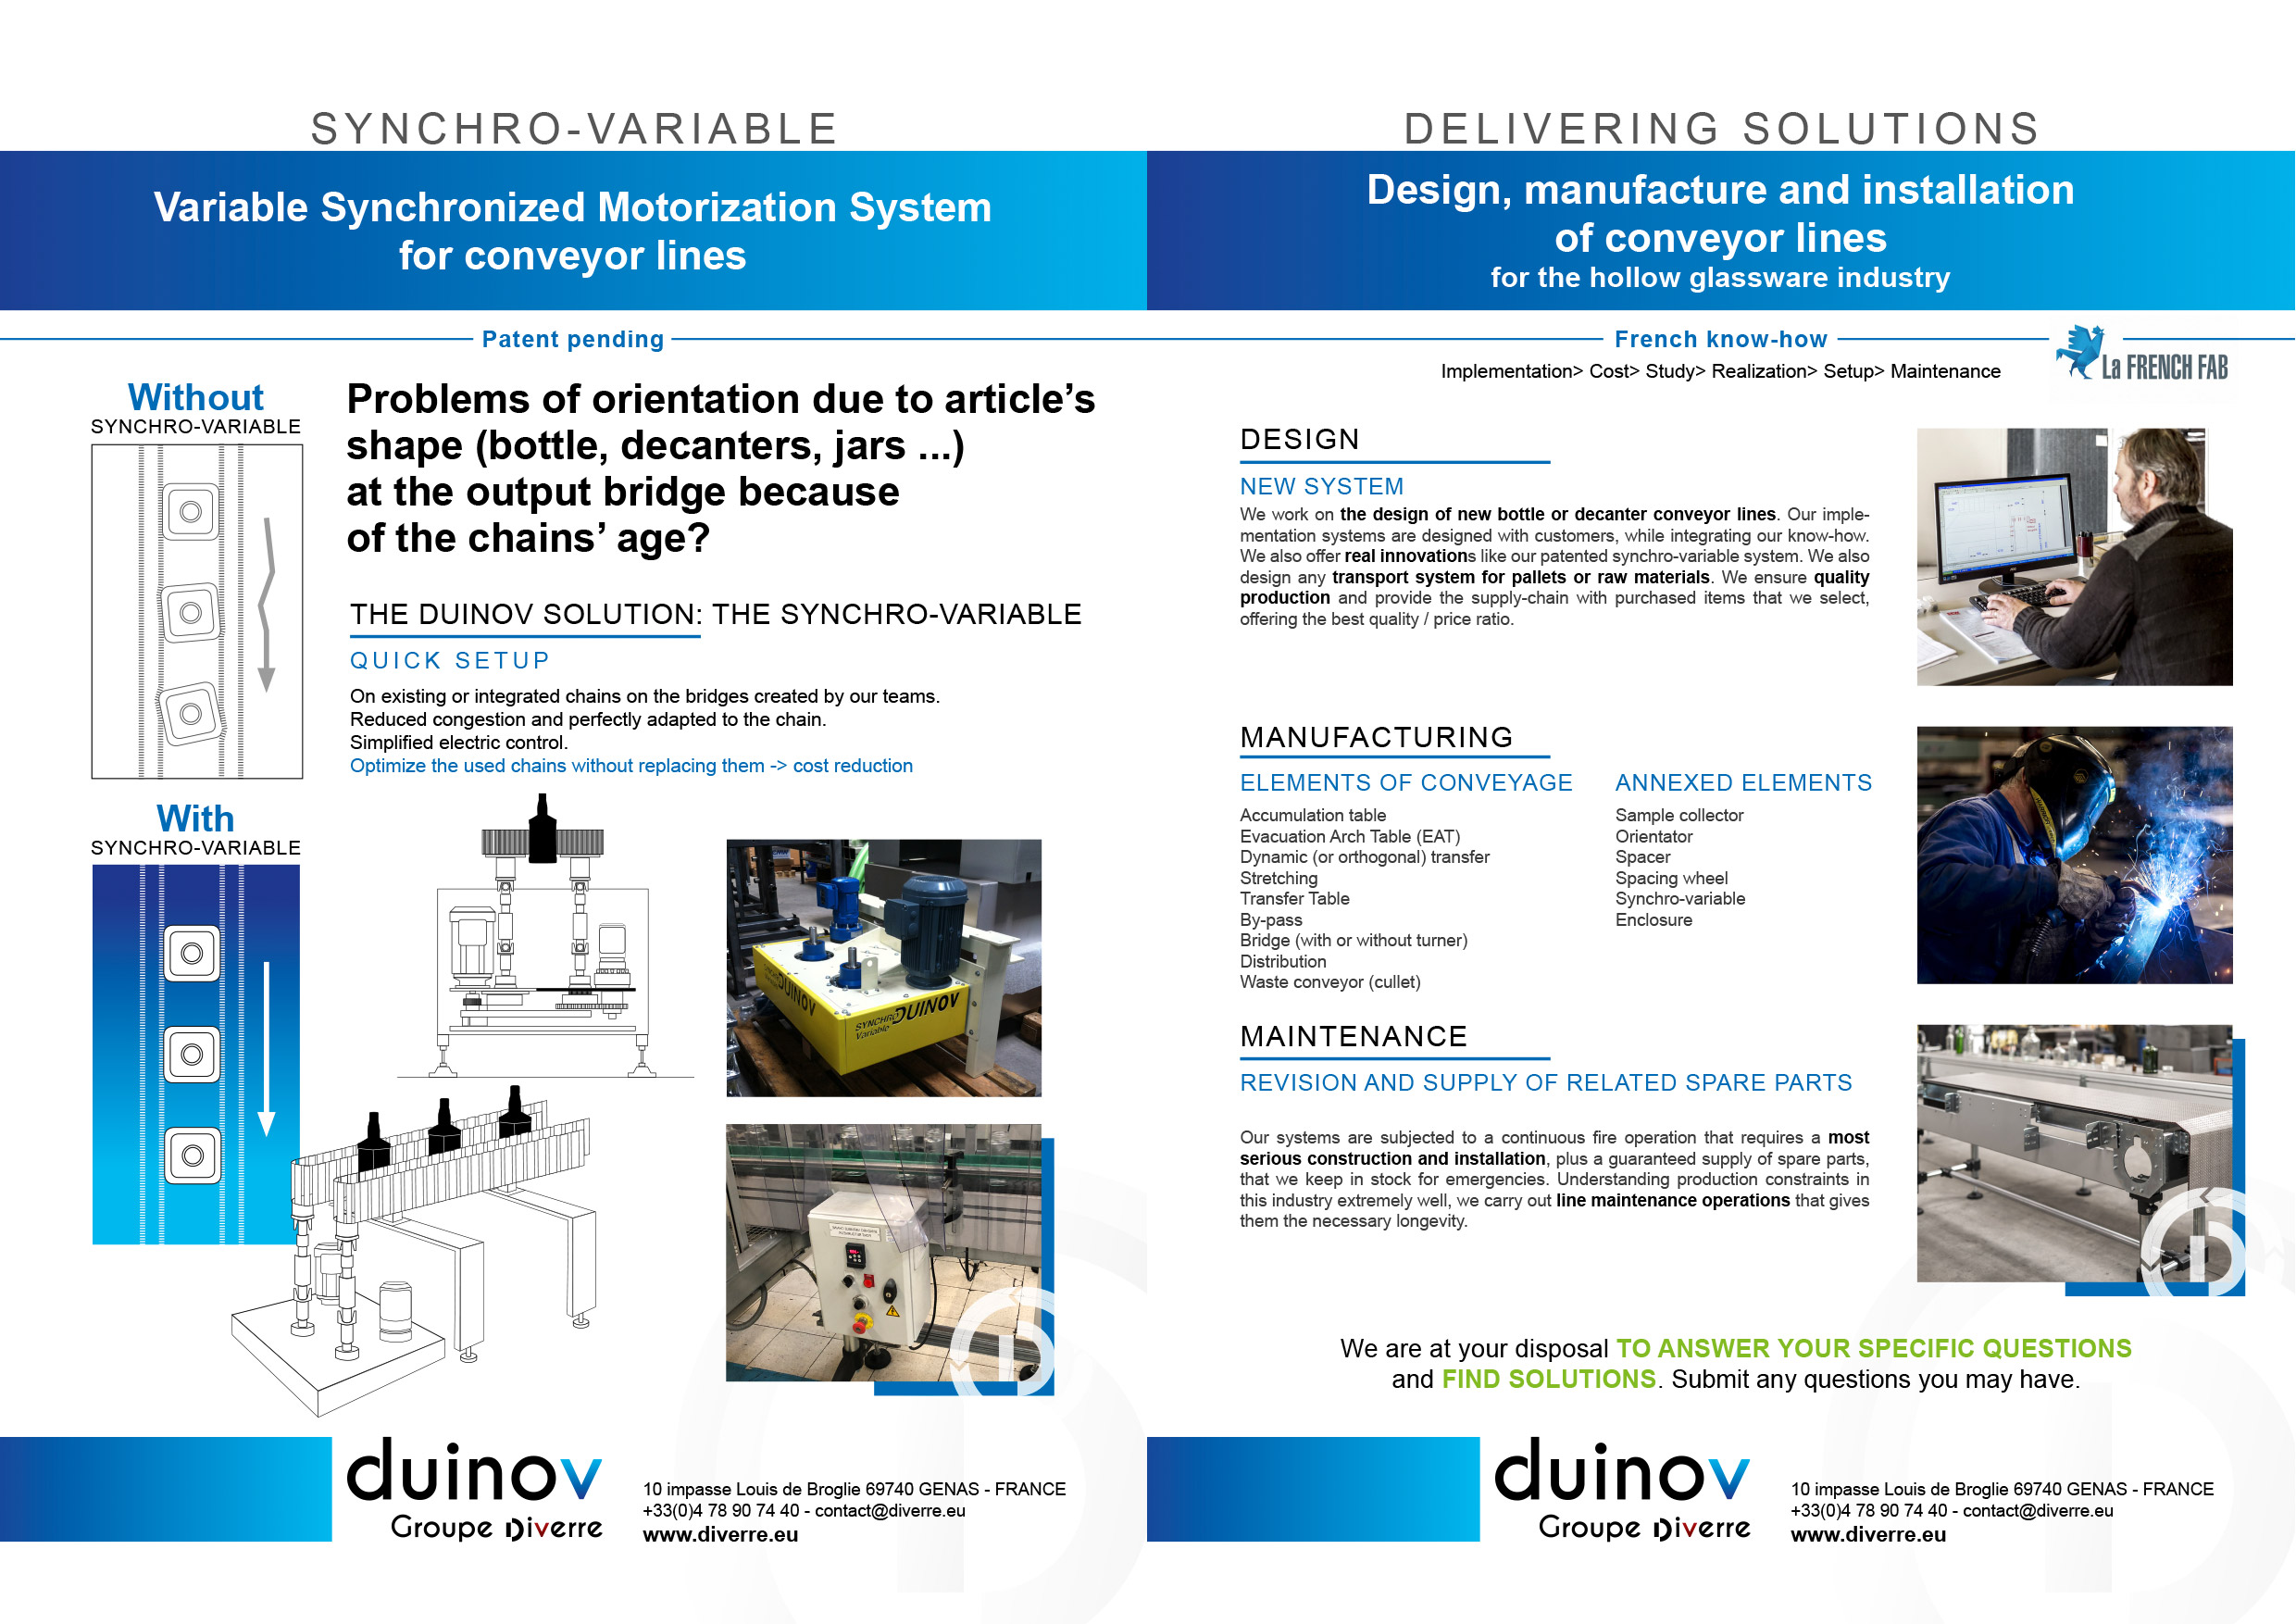 THE DUINOV SOLUTION: THE SYNCHRO-VARIABLE - Diverre